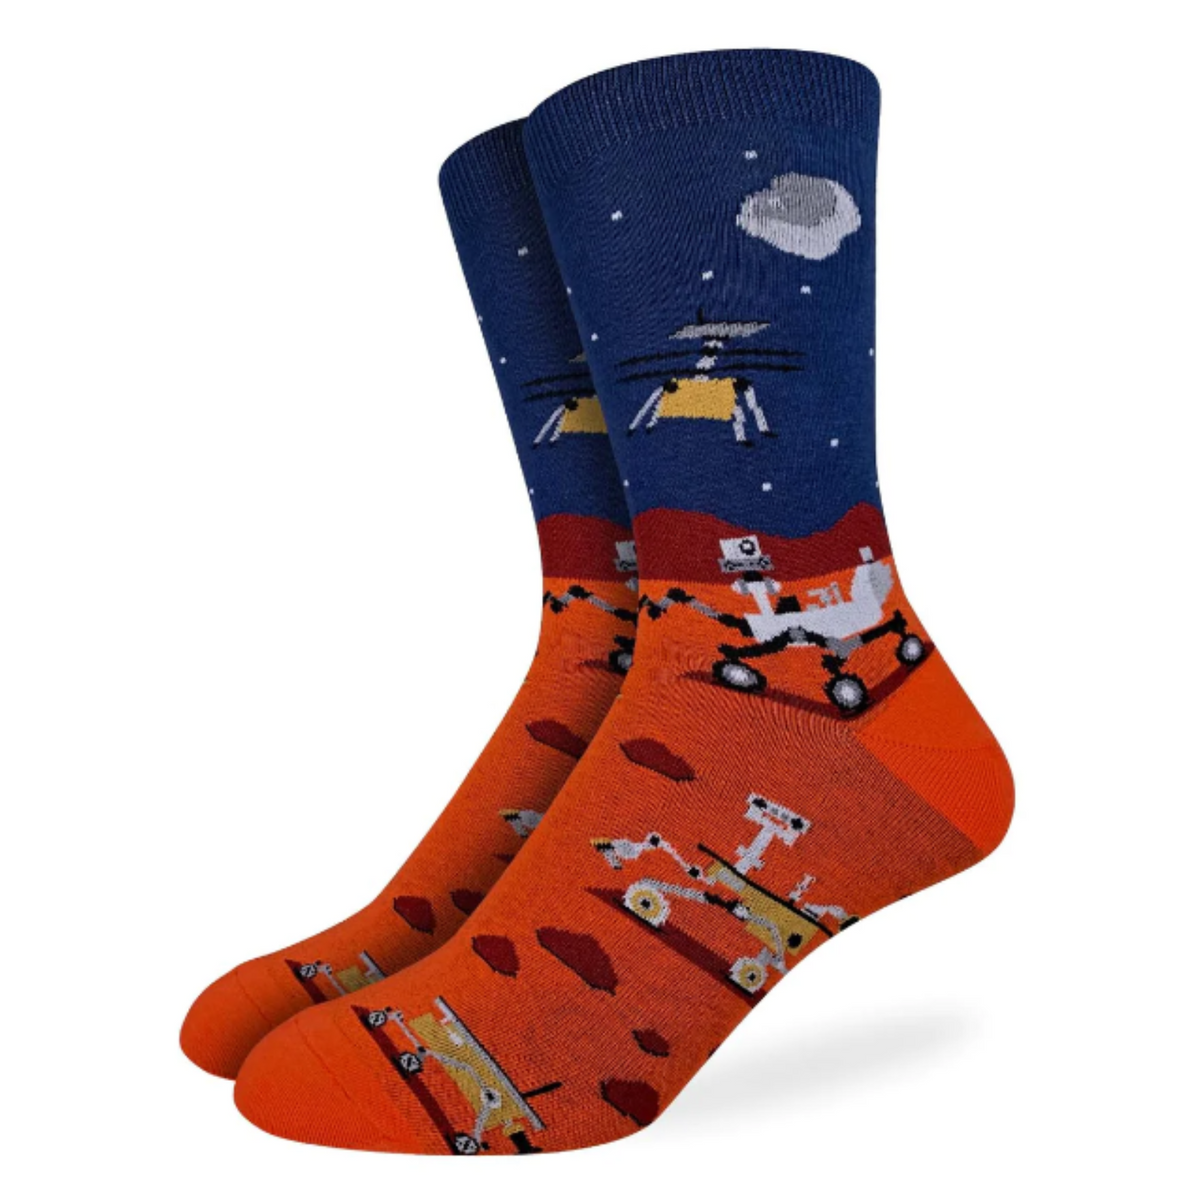 Good Luck Sock Mars Rover men&#39;s crew sock featuring blue outer space and red Mars with images of Oppie the NASA martian lander. Shown on display feet. 